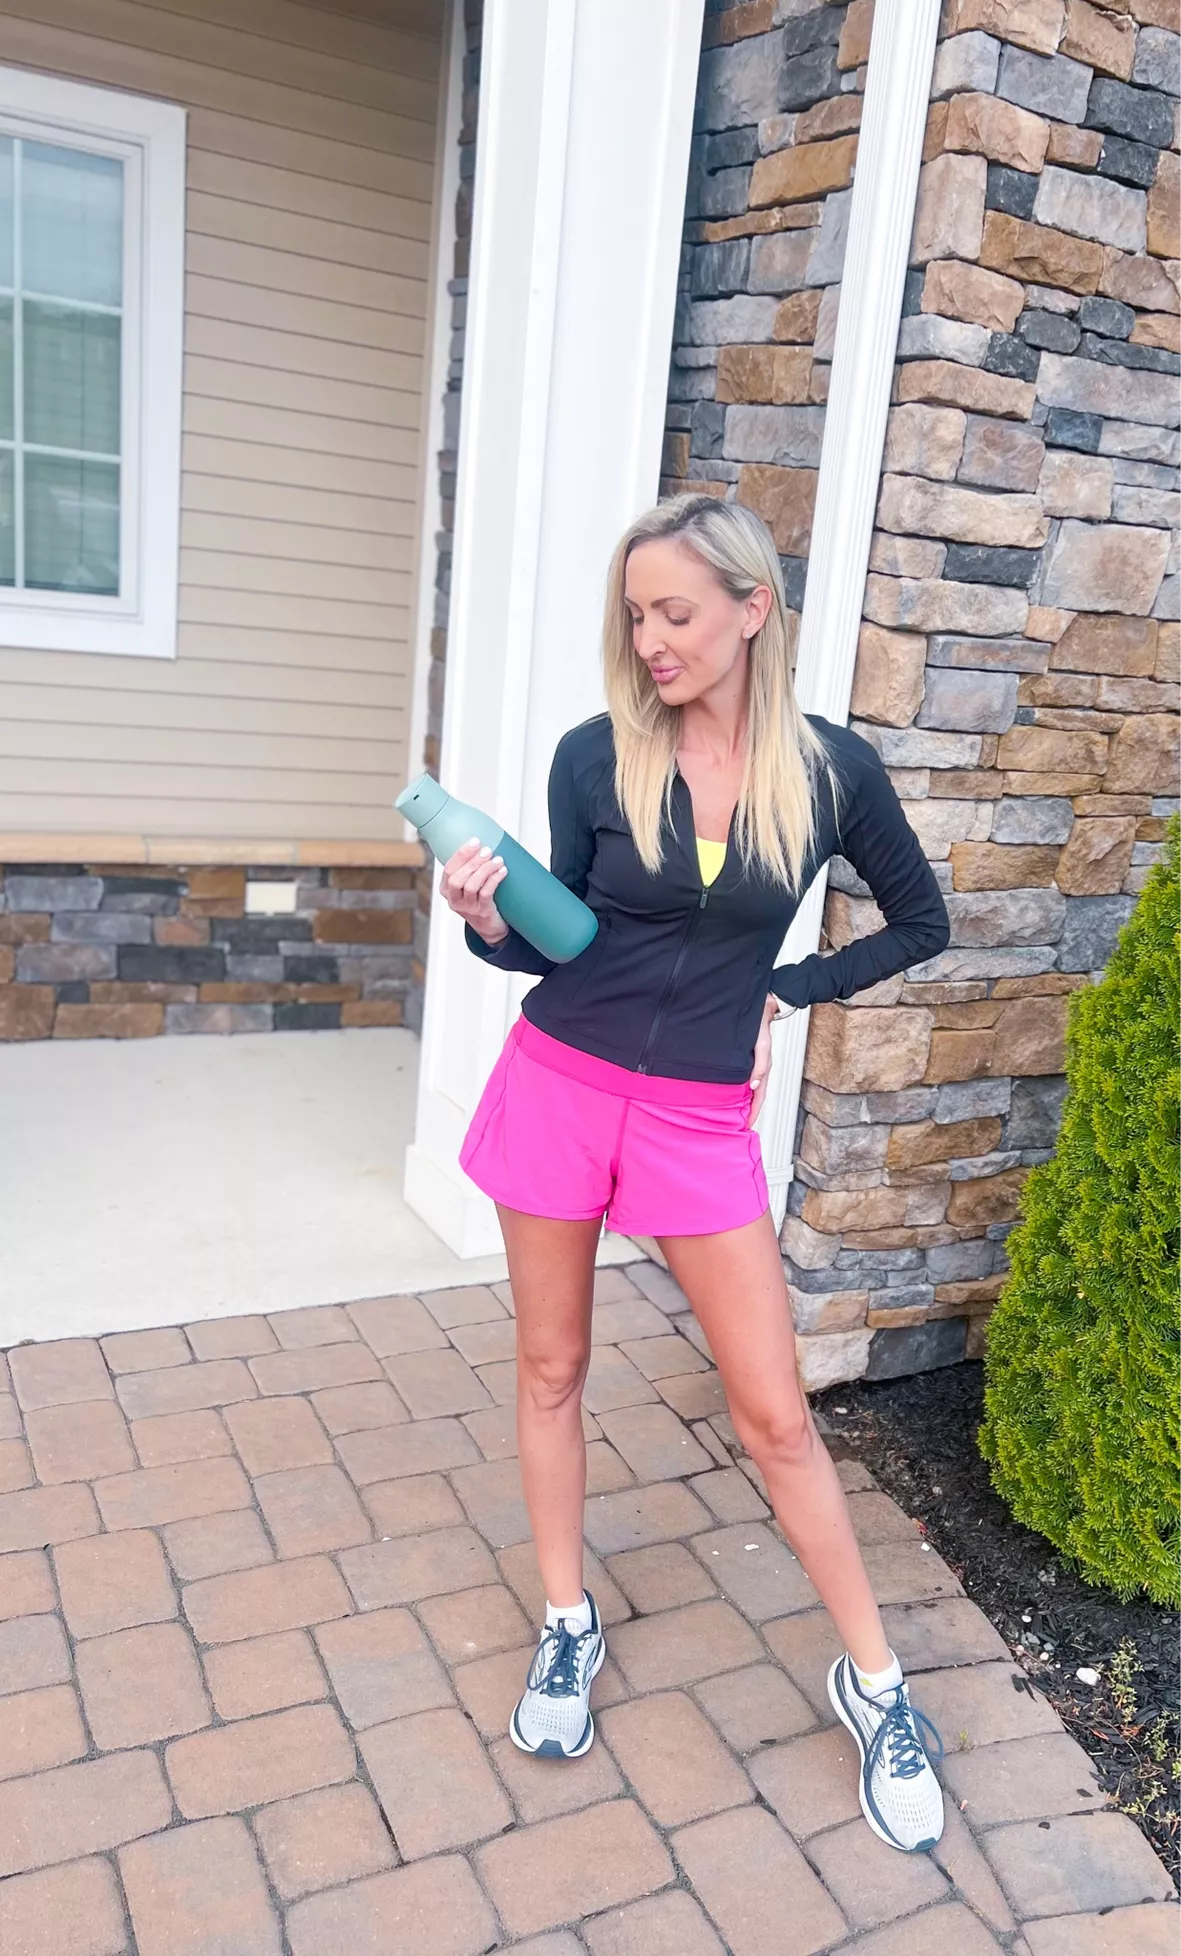 WellBuiltStyle on X: Light pink shorts. And yes, you can wear a long  sleeve knit with shorts - nice transitional look from spring to summer. Be  sure to pull up the sleeves